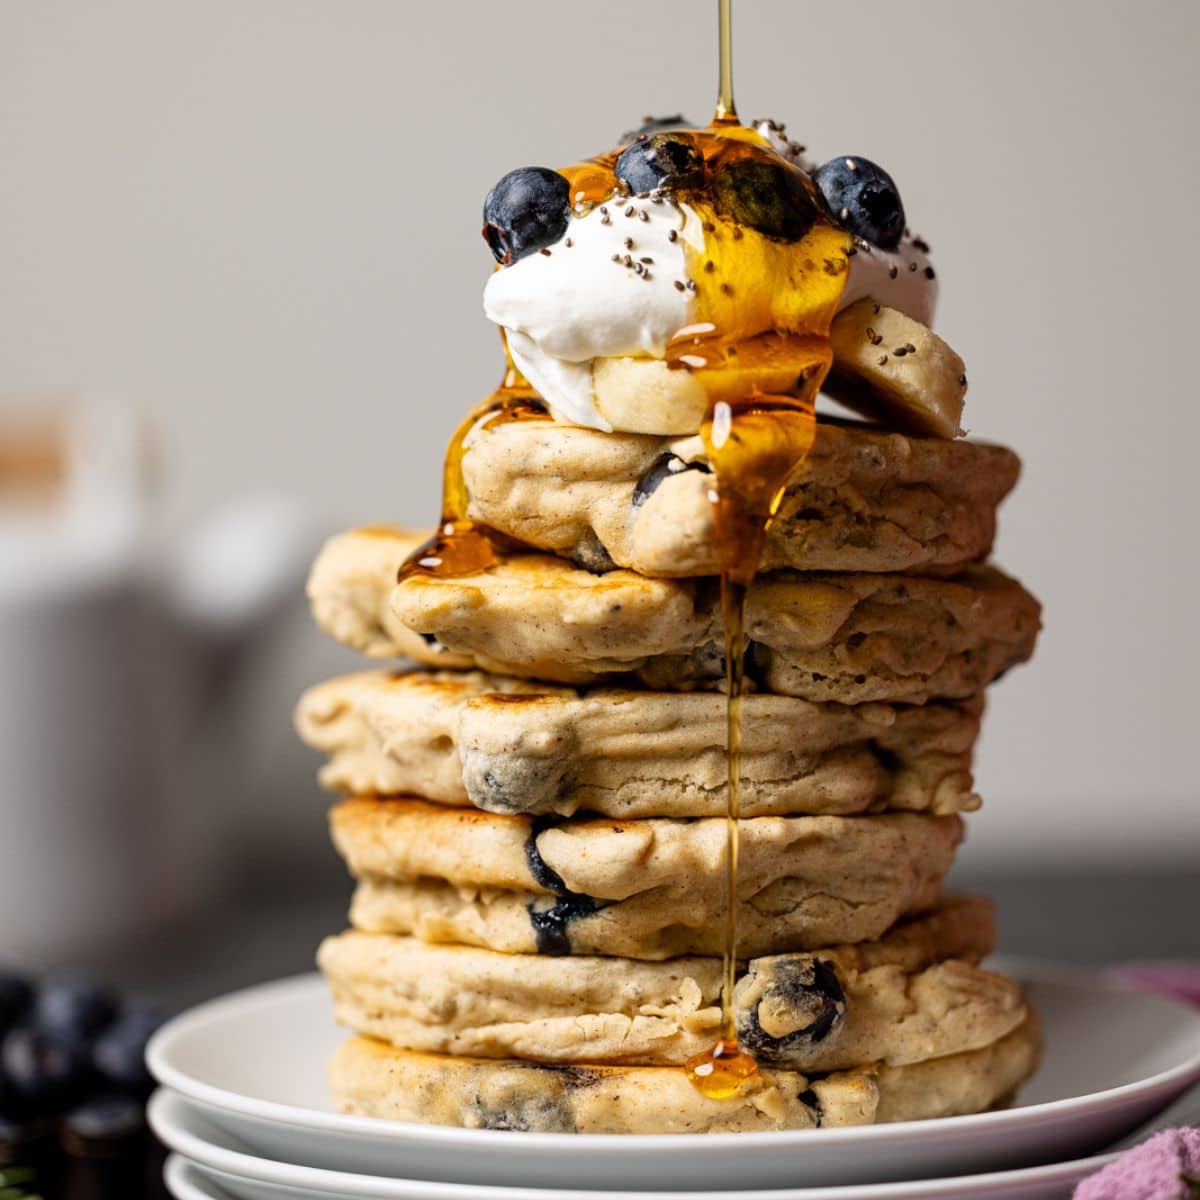 Drizzle of maple syrup atop stacks of pancakes on three stacks of plates.